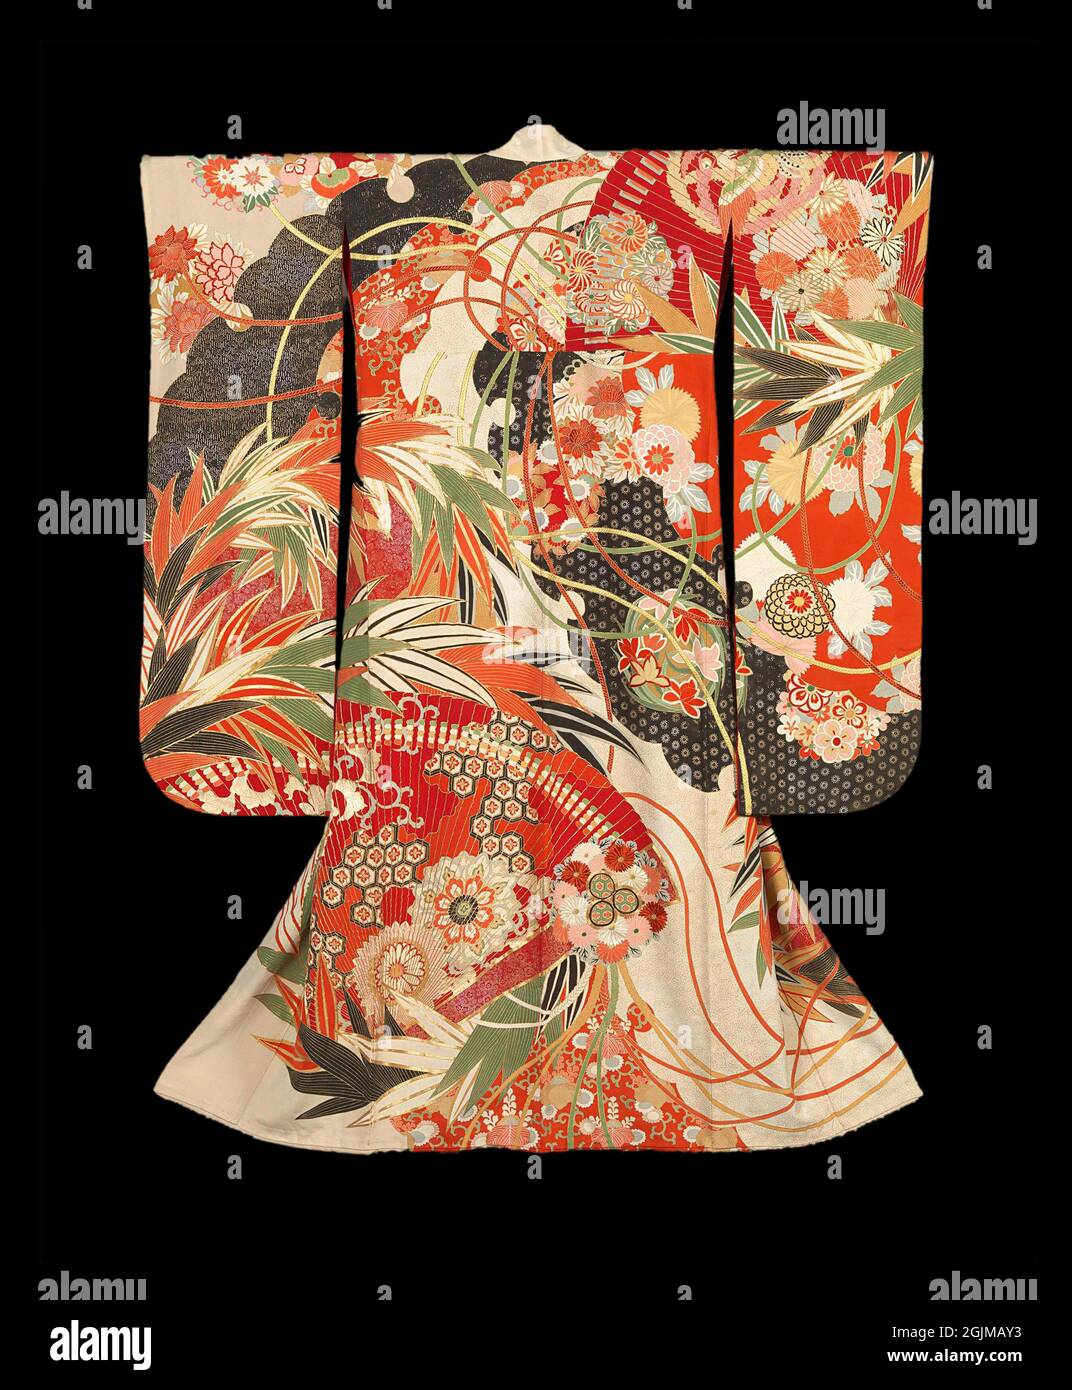 Japanese Kimono for an unmarried woman. The kimonoÕs sumptuous appearance is strengthened by the silver and gold accents, embroidered with thread or applied with gold foil. Stock Photo